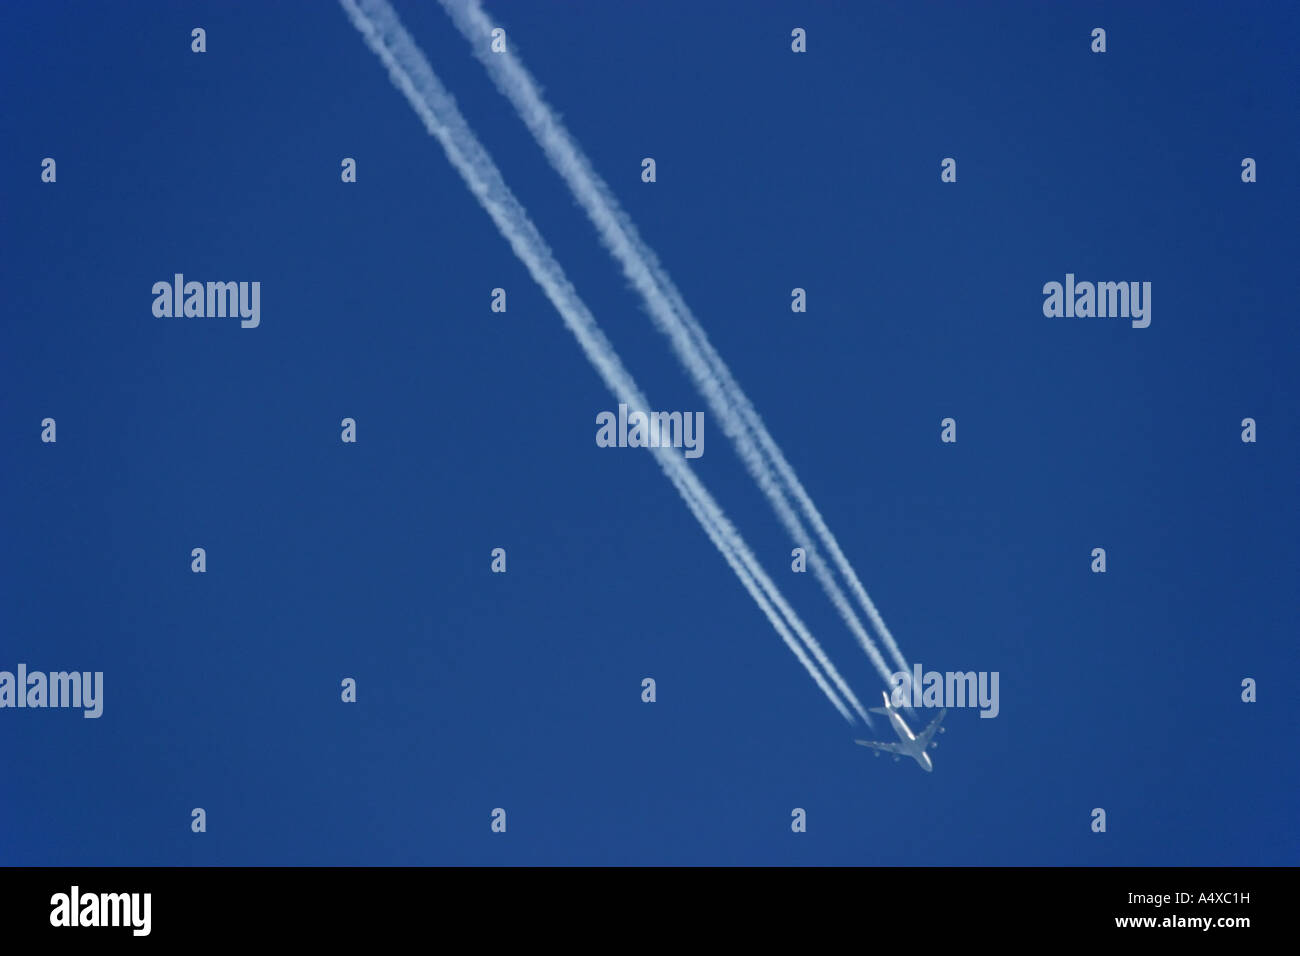 Is aviation declining? Jet with vapor trail, emission of carbon dioxide Stock Photo